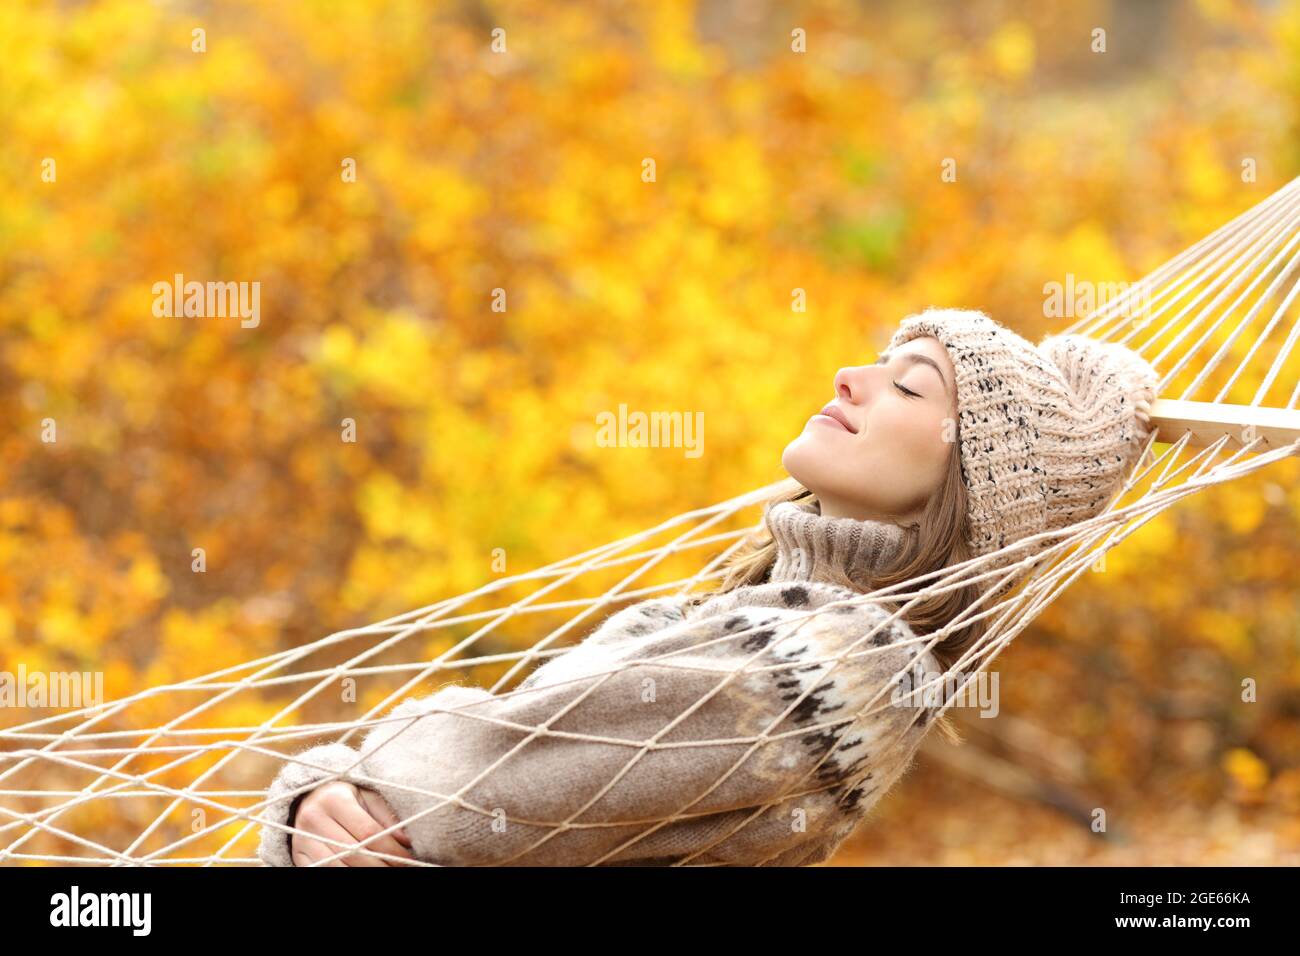 Side view portrait of a woman sleeping on hammock in a forest in autumn Stock Photo